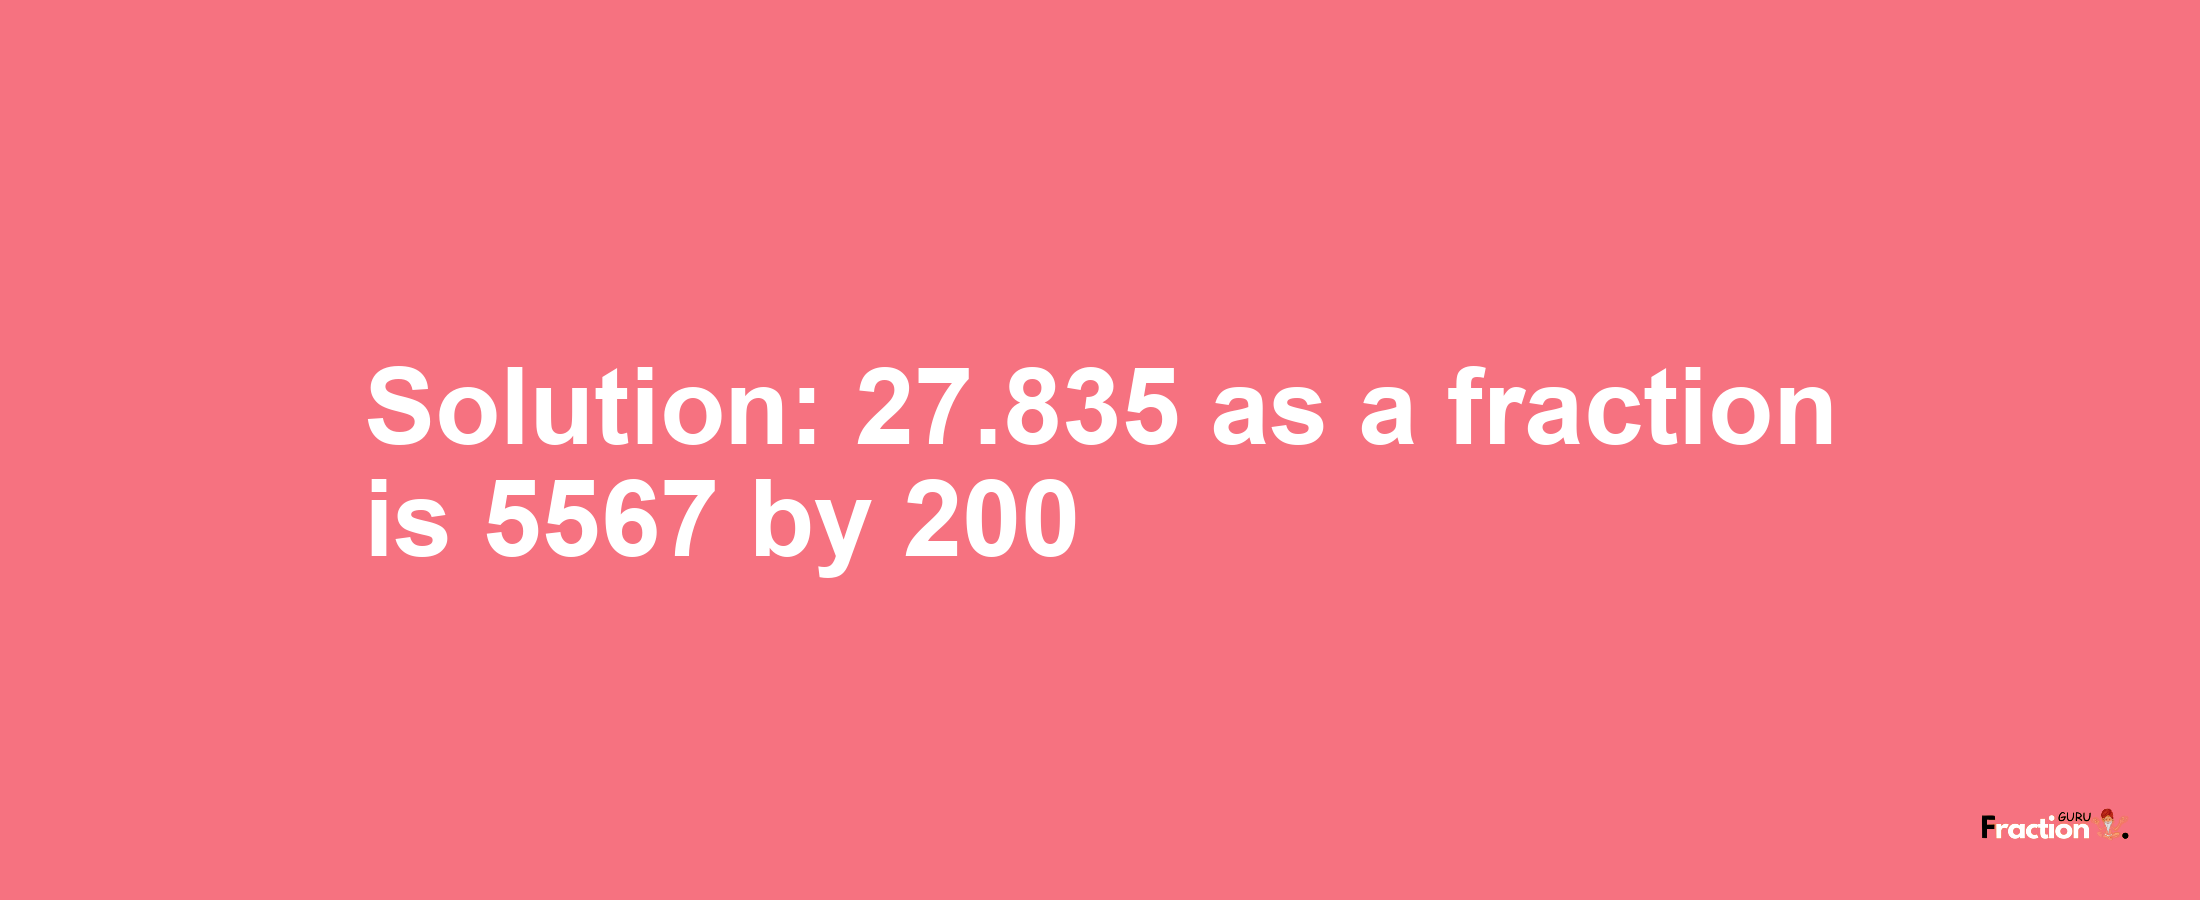 Solution:27.835 as a fraction is 5567/200